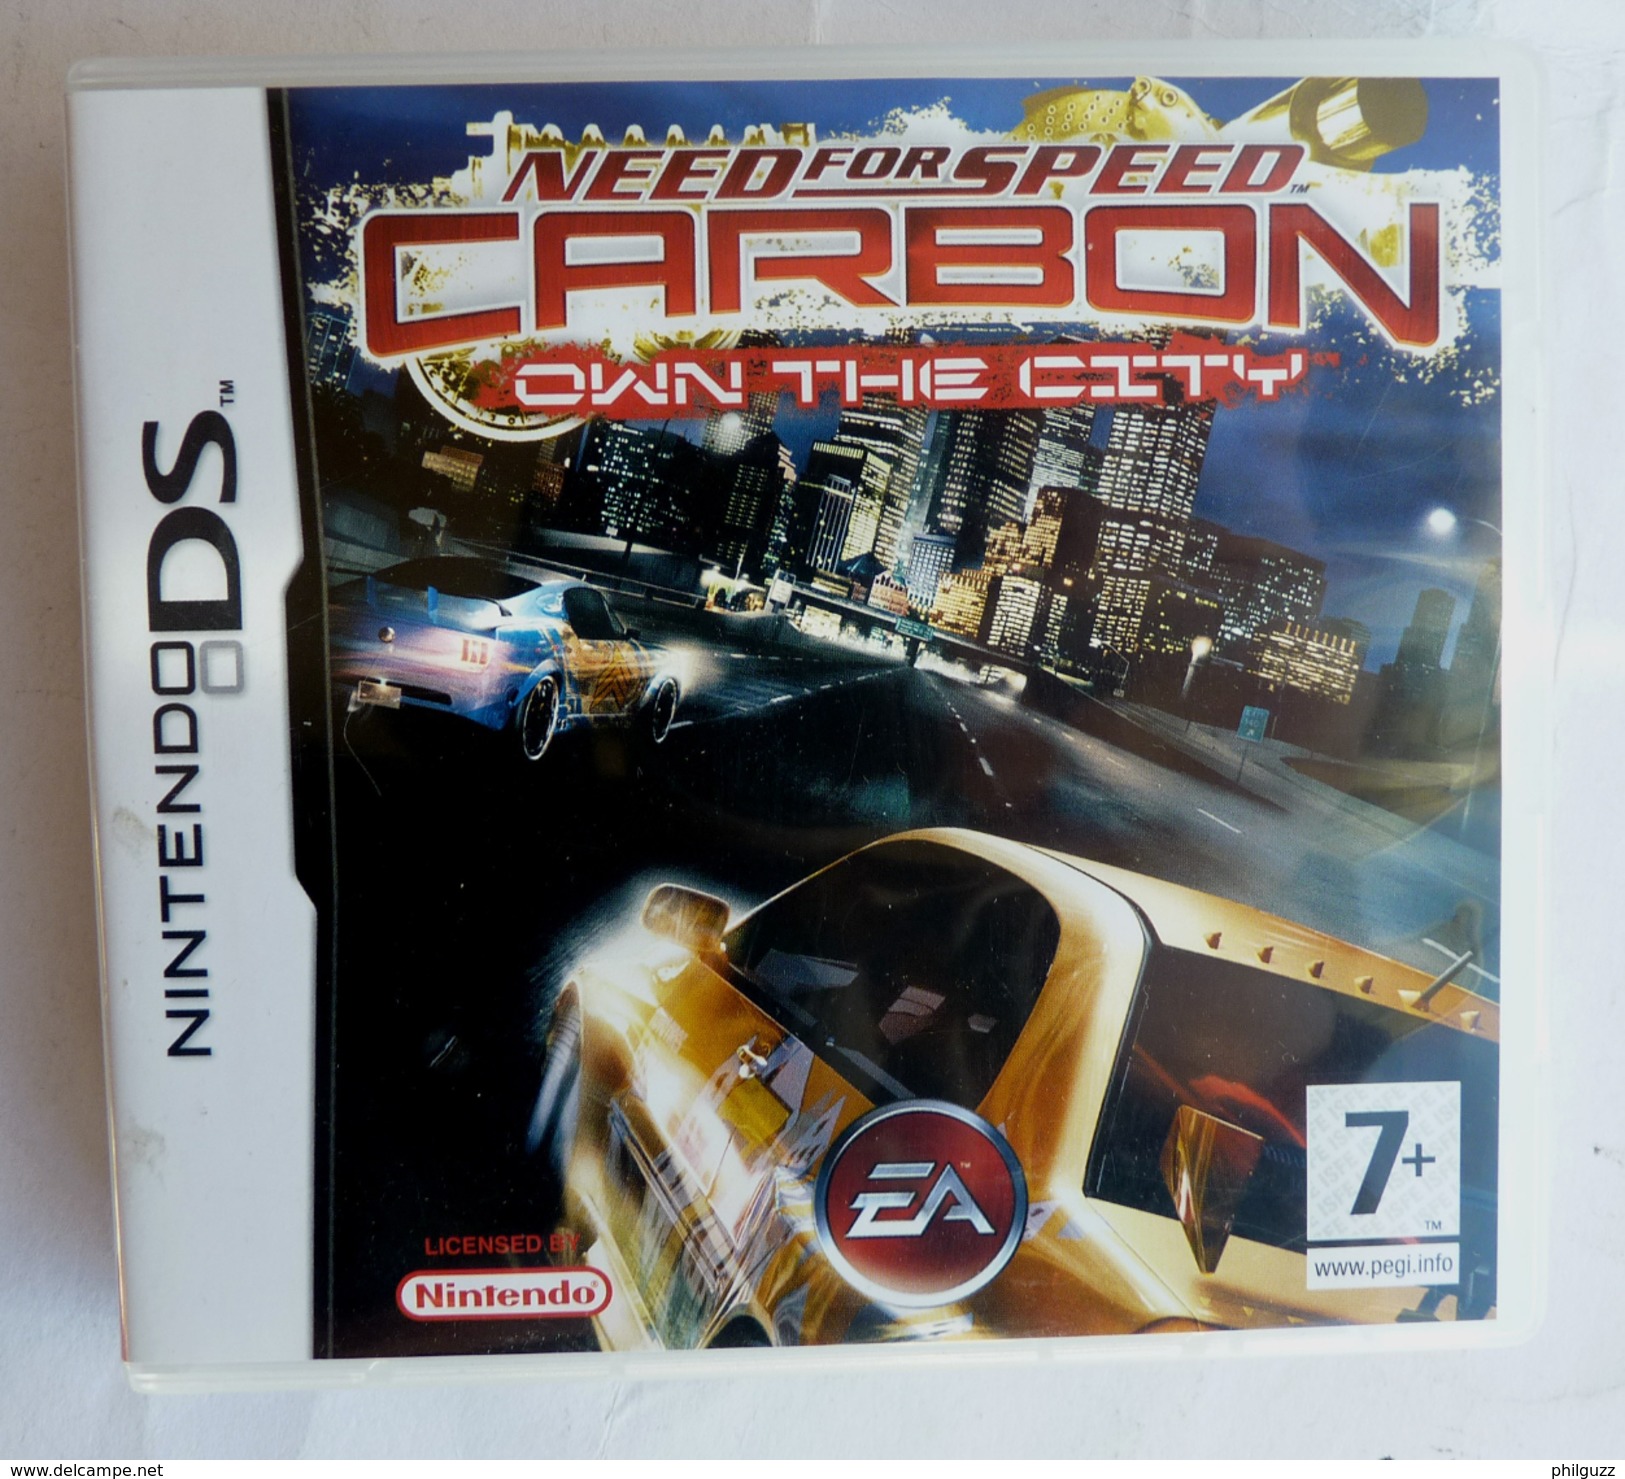 JEU NINTENDO DS NEED FOR SPEED CARBON OWN THE CITY - Nintendo DS